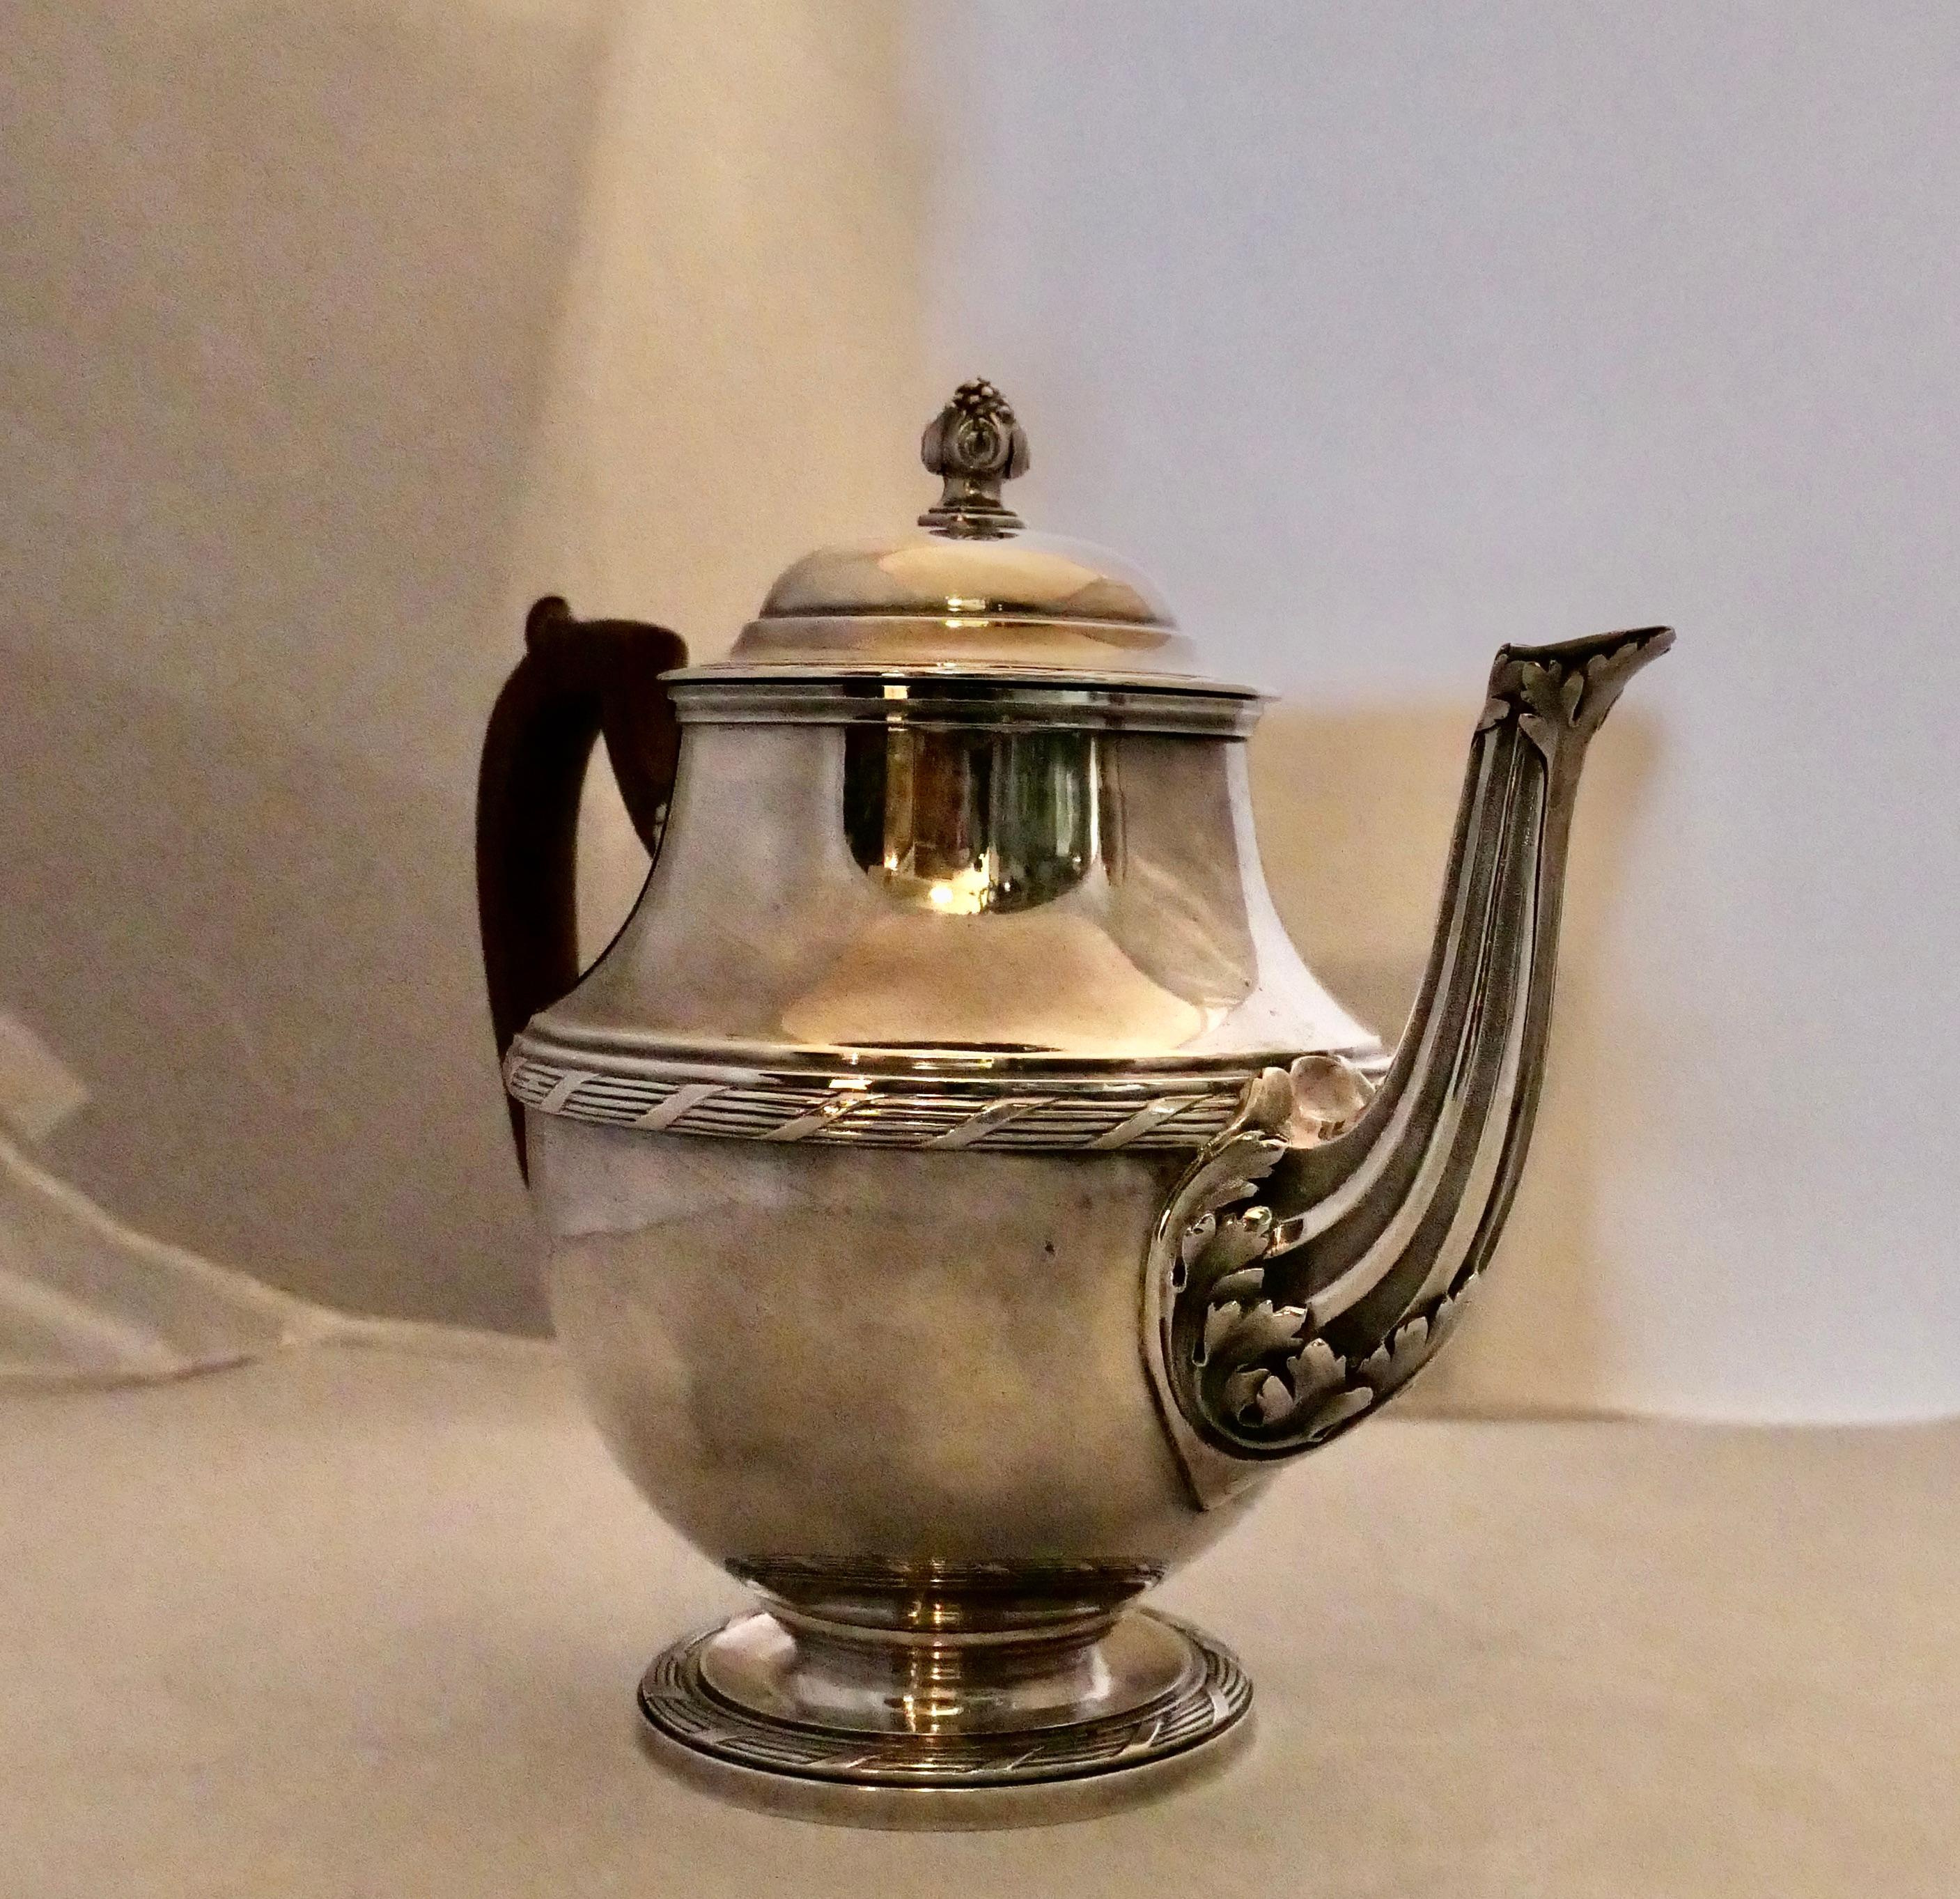 This vintage rare French sterling silver tea pot is beautifully designed by Georges Fouquet-Lapar in the 1930’s. It is stylishly decorated with an elaborate spout & subtle banding. An elegant curved rosewood handle is attached to its body. The